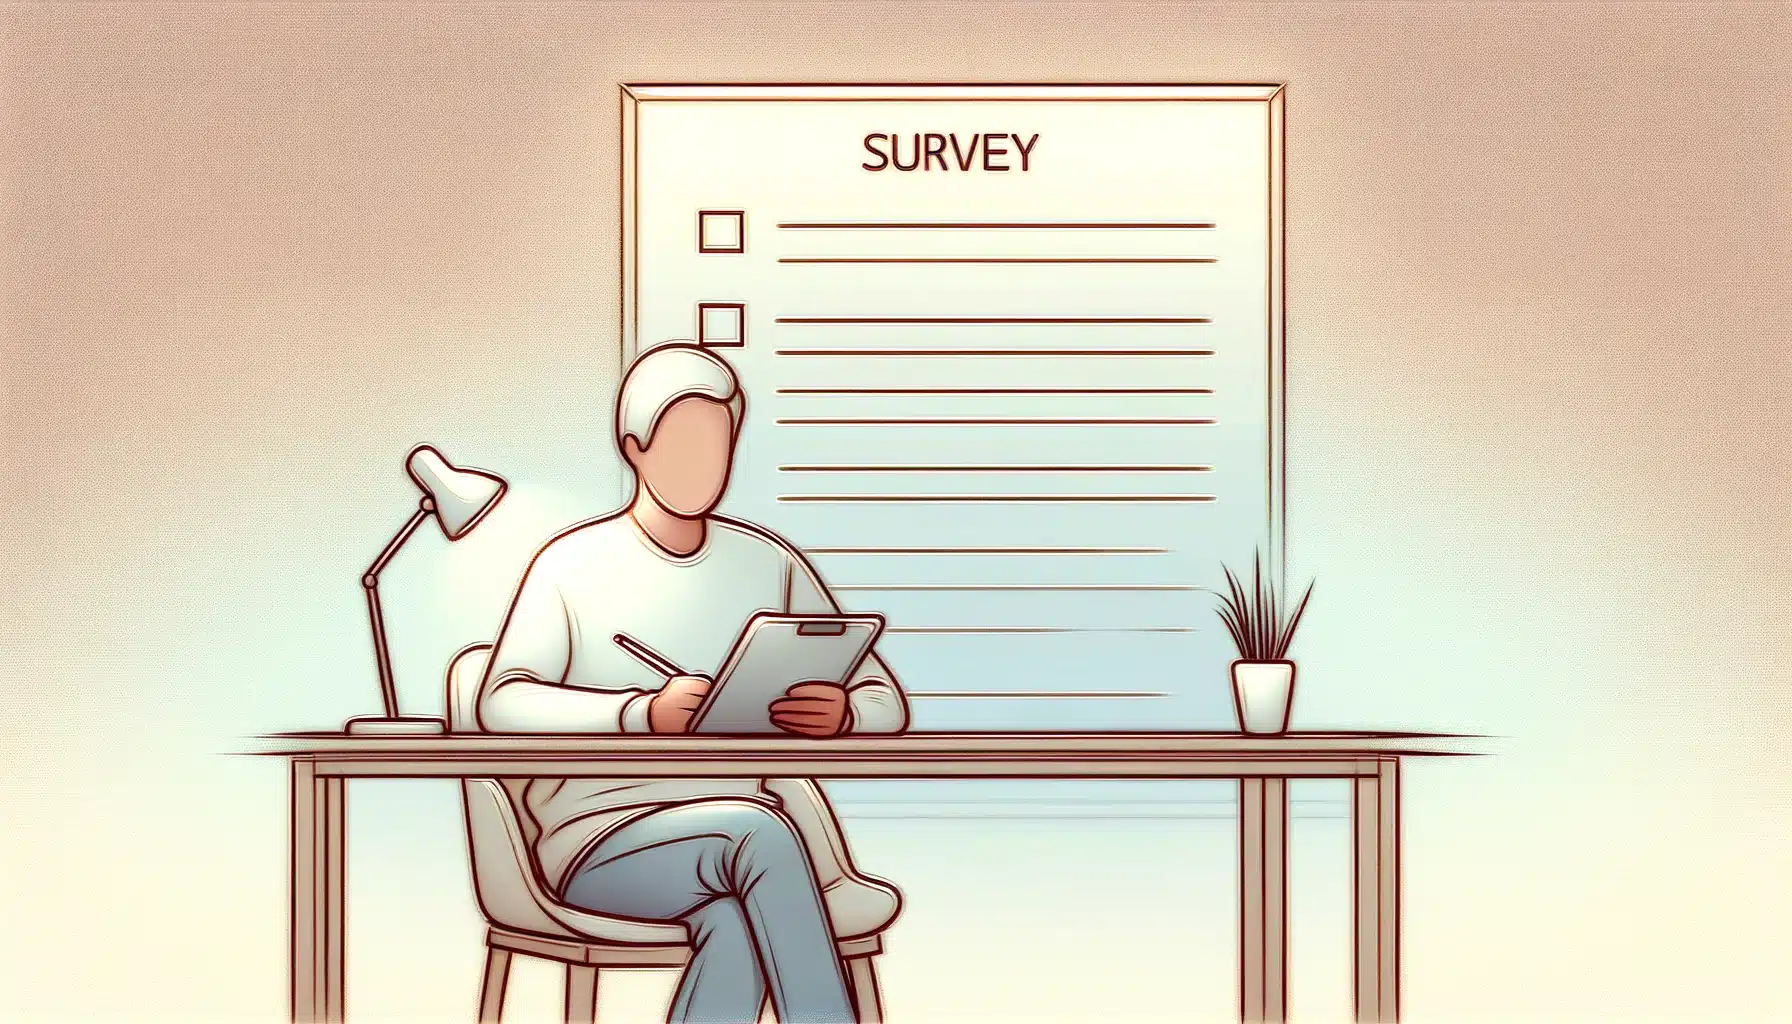 a person filling in a survey